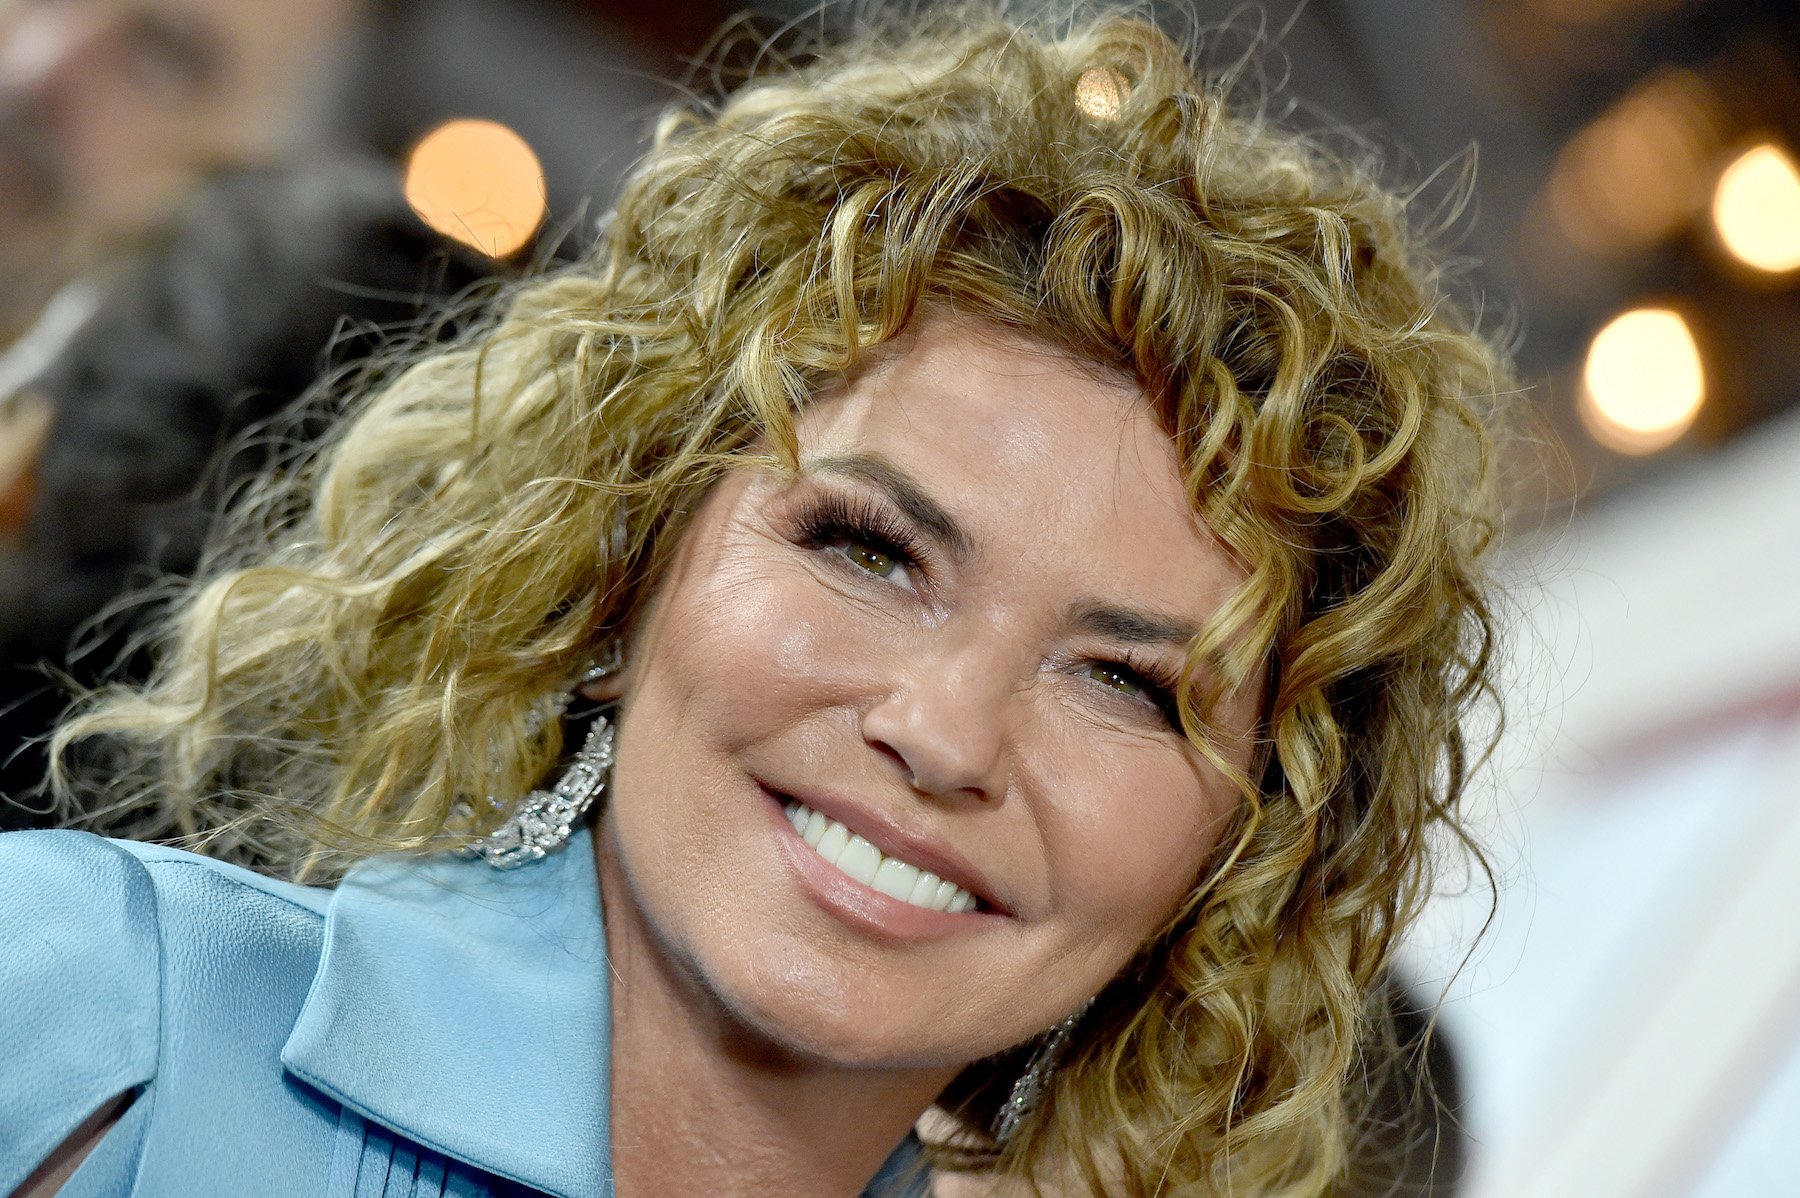 Shania Twain Once Peed Herself On Stage and Hid It Discreetly